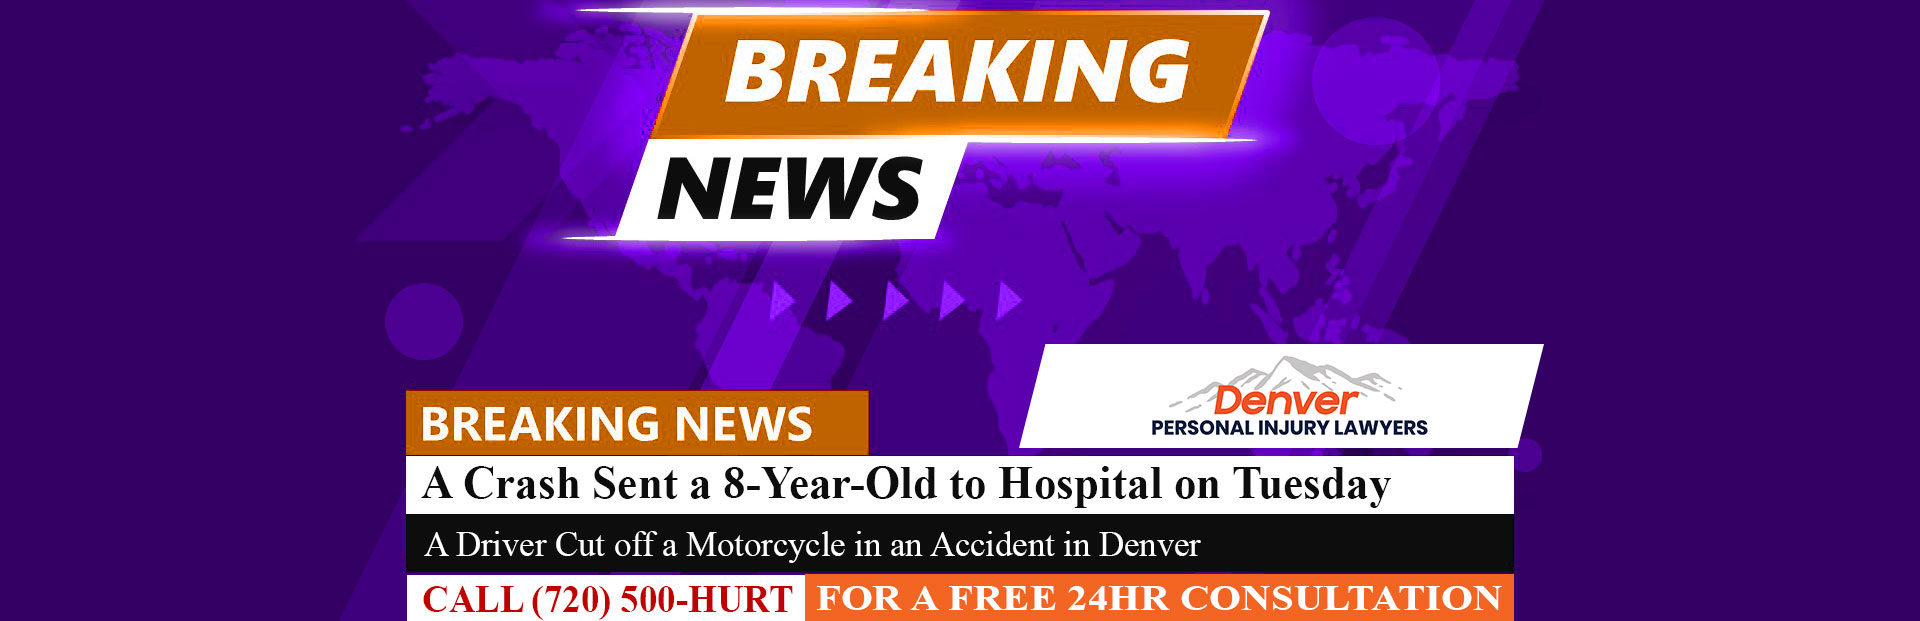 [05-22-24] Denver Police Looking for Driver in Crash That Sent 8-Year-Old to Hospital